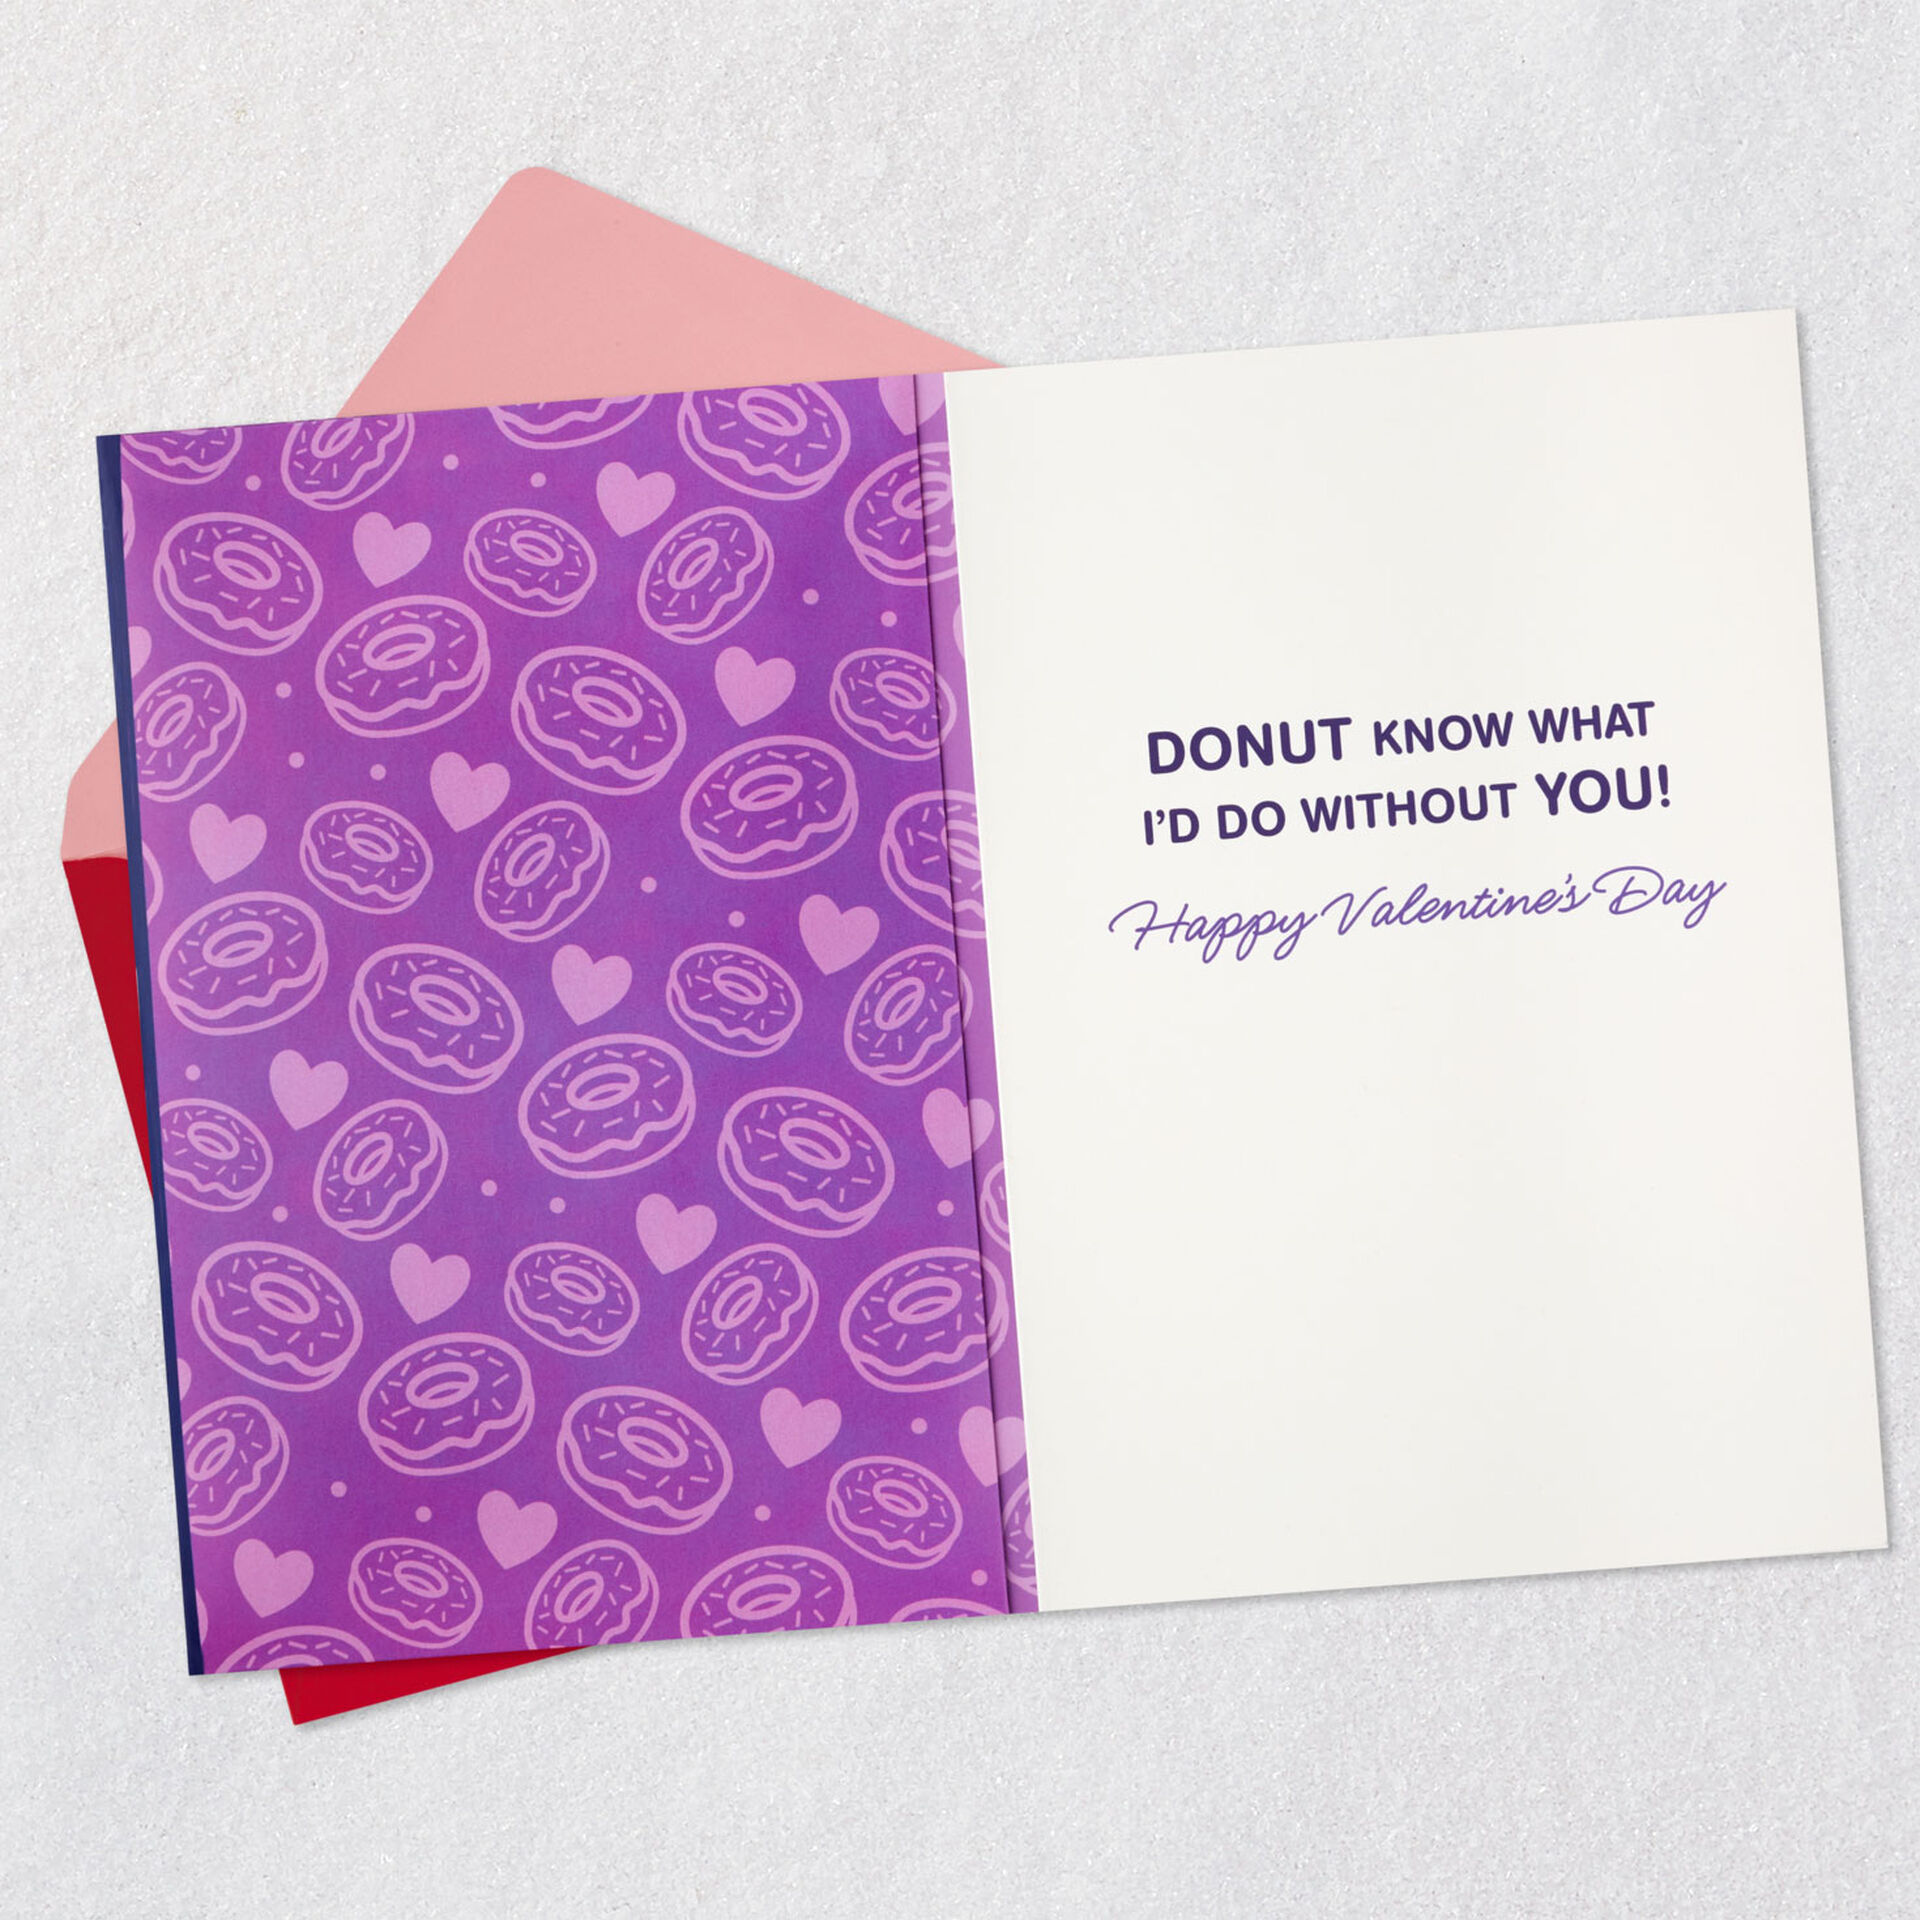 LightUp-Donut-Funny-Musical-Valentines-Day-Card_899VAY3046_03